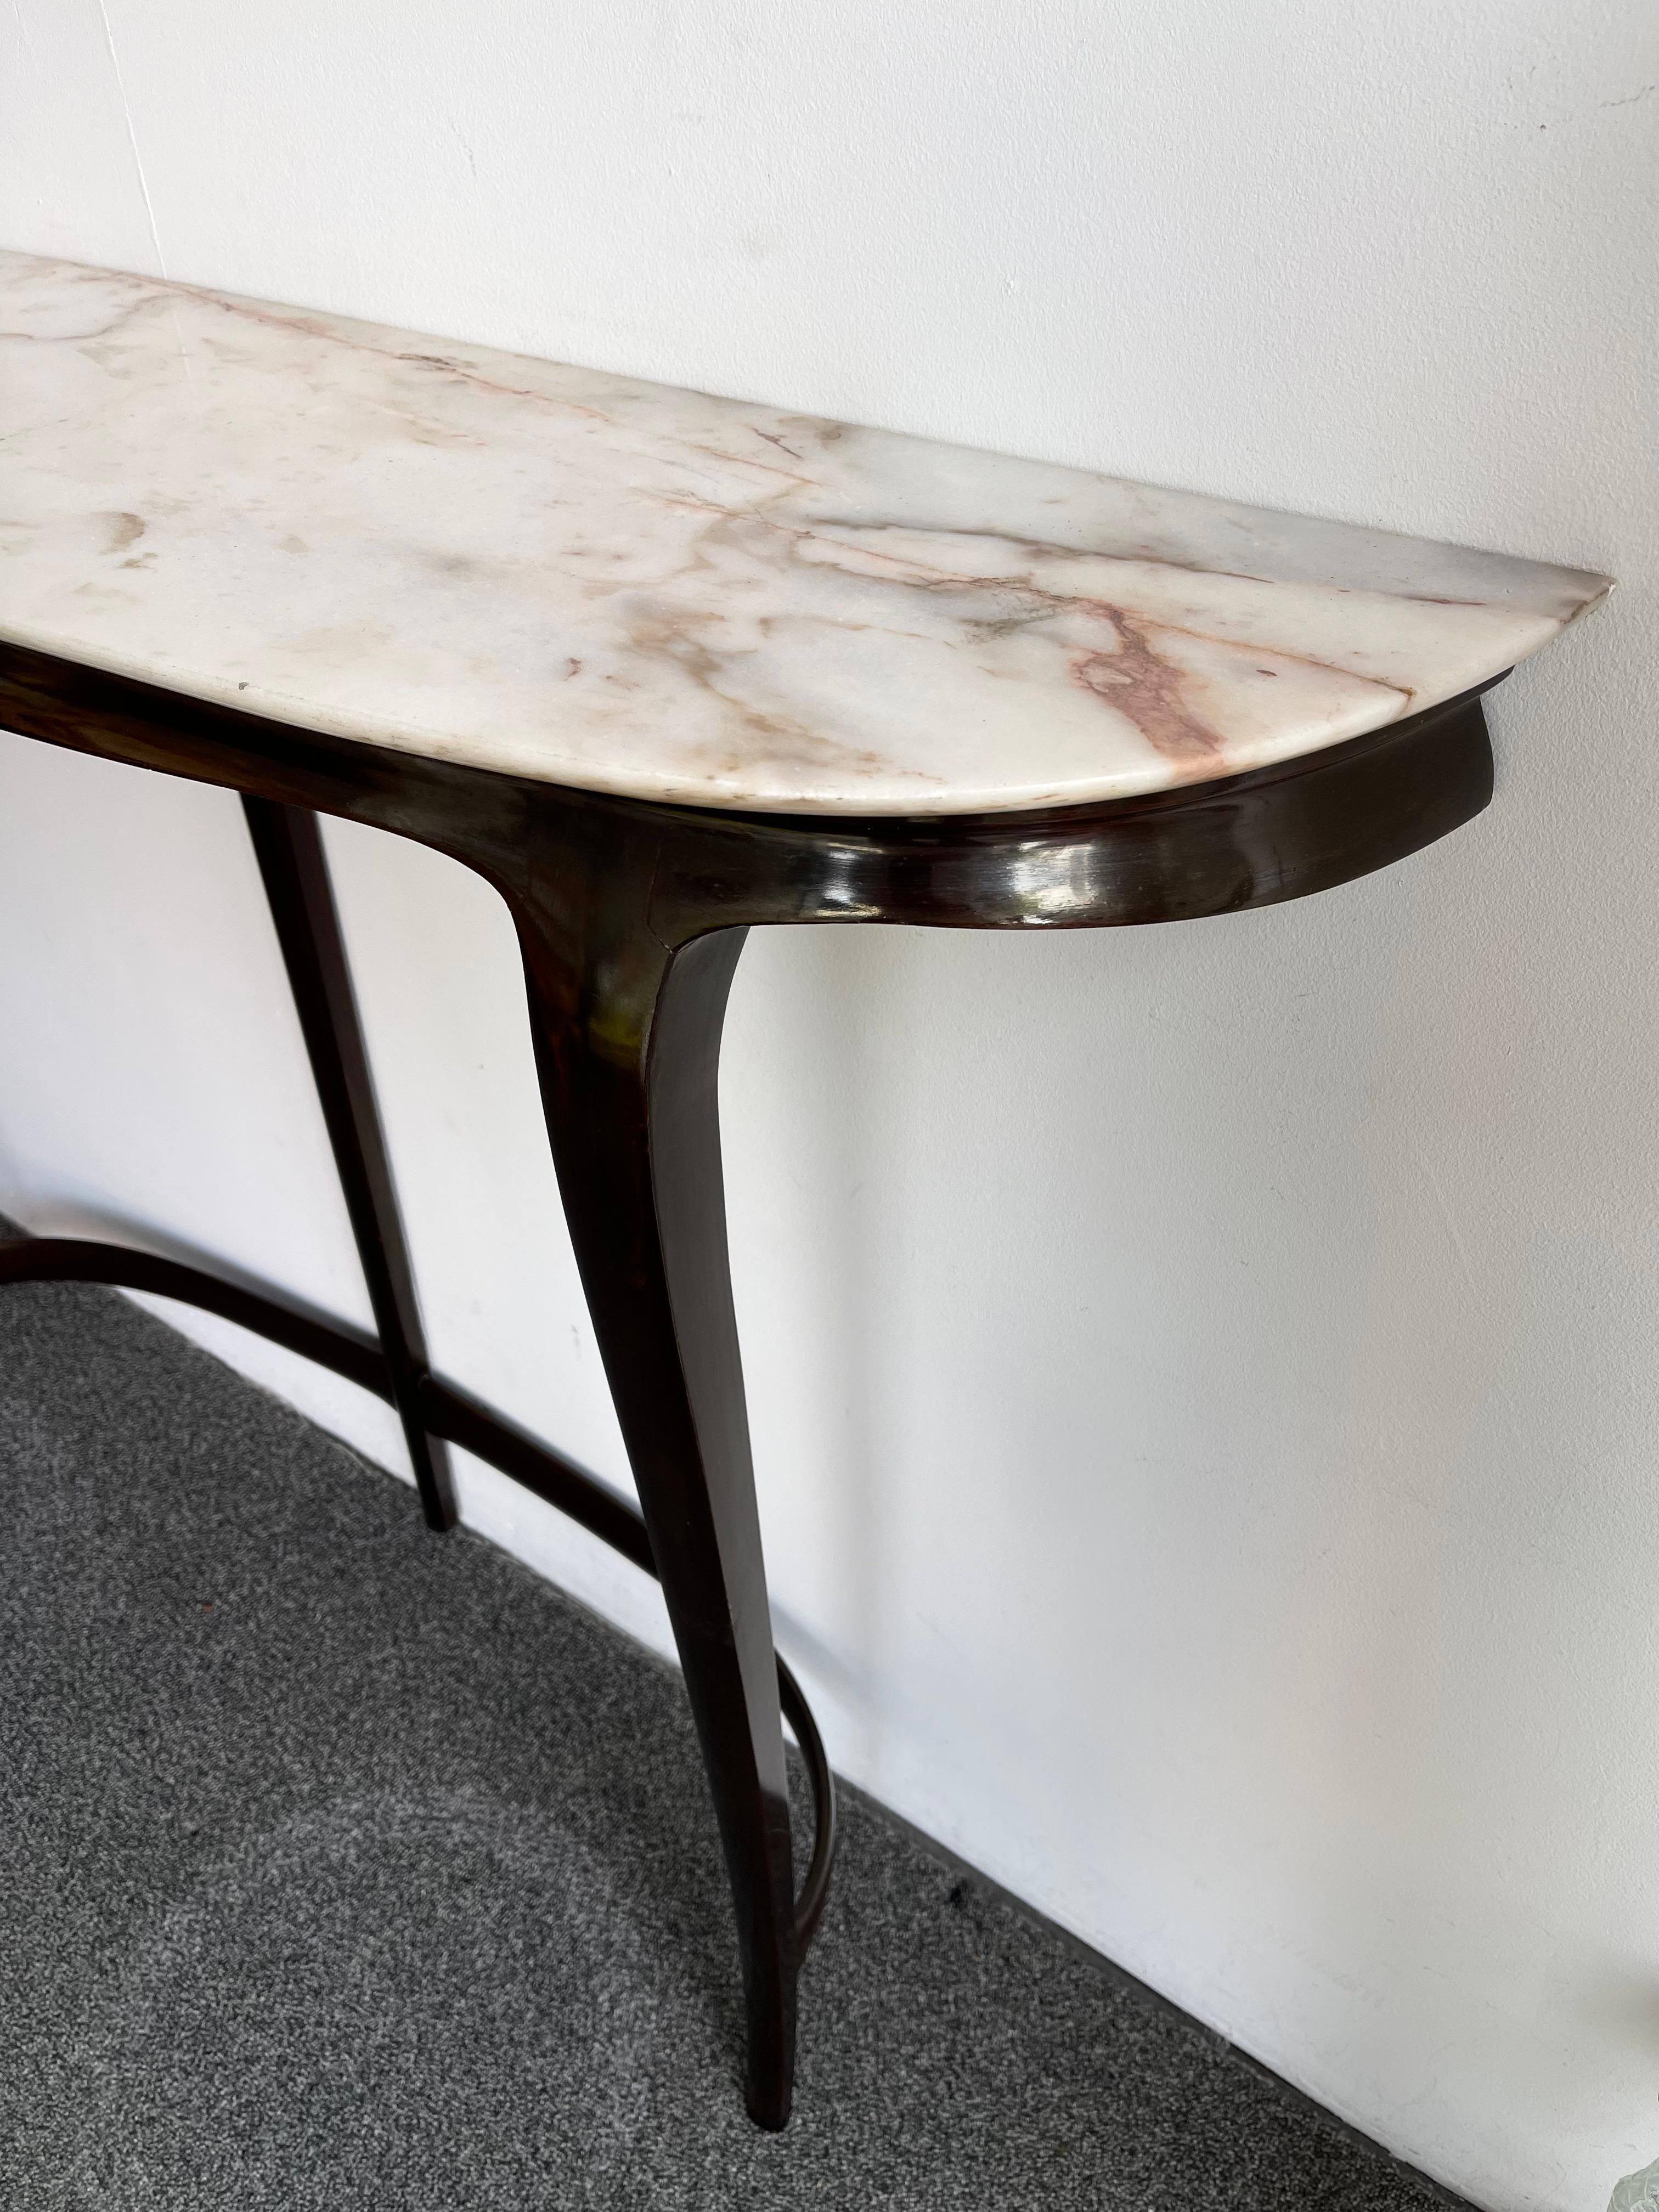 Rare Mid-Century Modern console table in wood and marble by the italian design manufacture La Permanente Mobili Cantù, design attributed to designer Gio Ponti due to his long collaboration with the manufacture during the 1950s, 1960s. Famous design